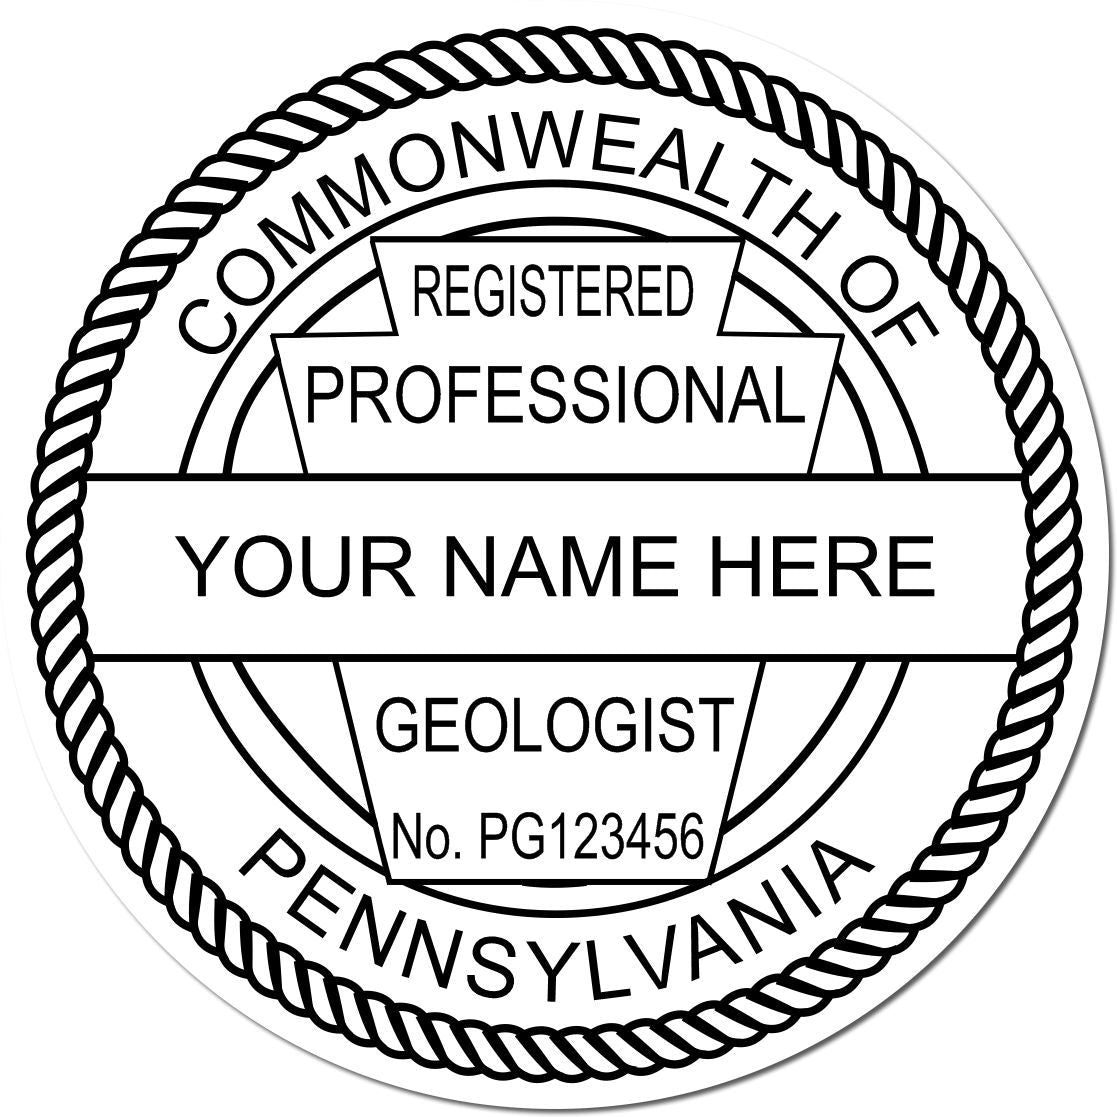 This paper is stamped with a sample imprint of the Pennsylvania Professional Geologist Seal Stamp, signifying its quality and reliability.